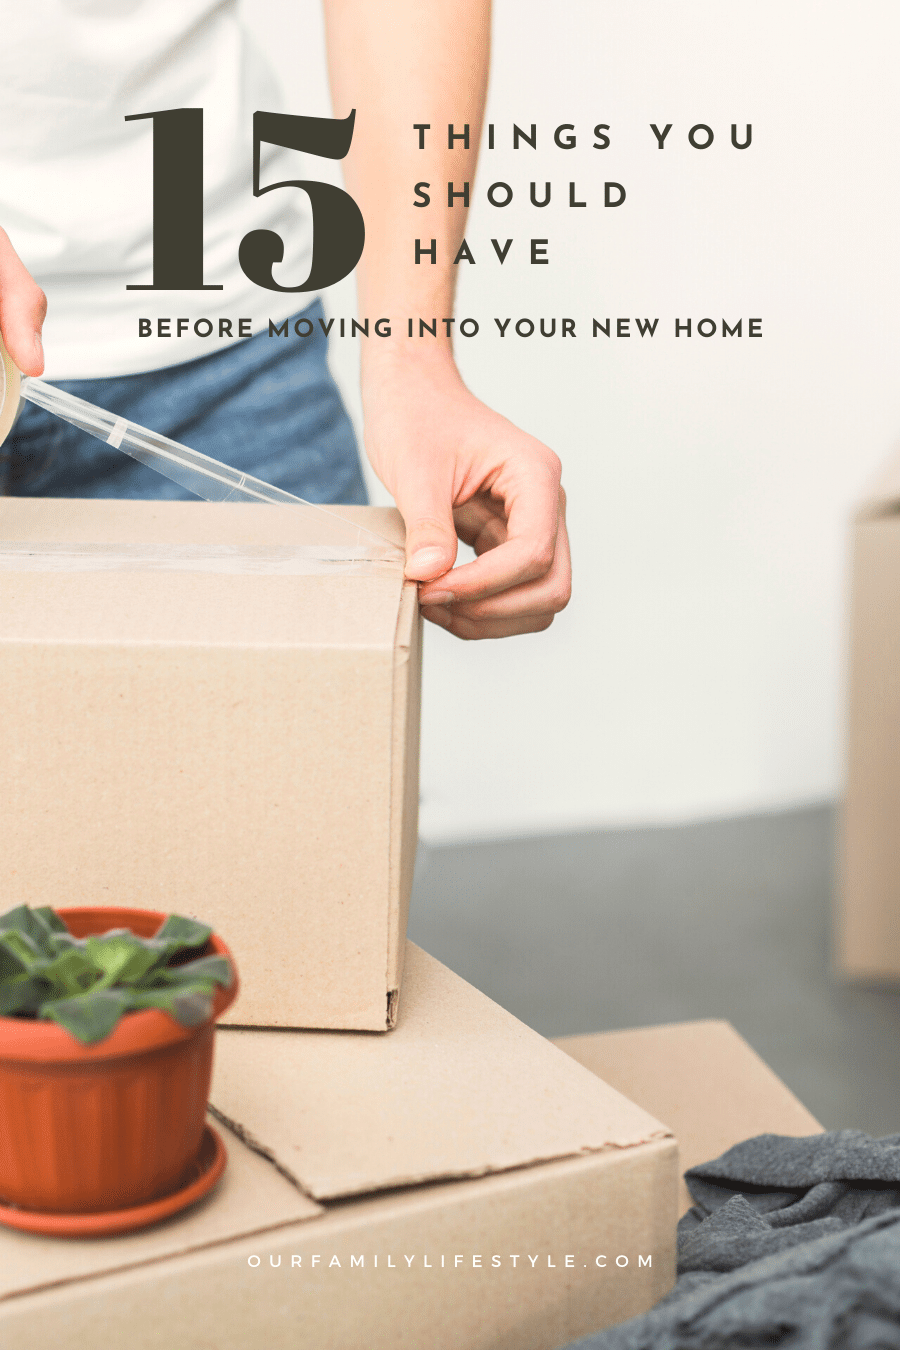 15 Things You Should Have Before Moving Into Your New Home